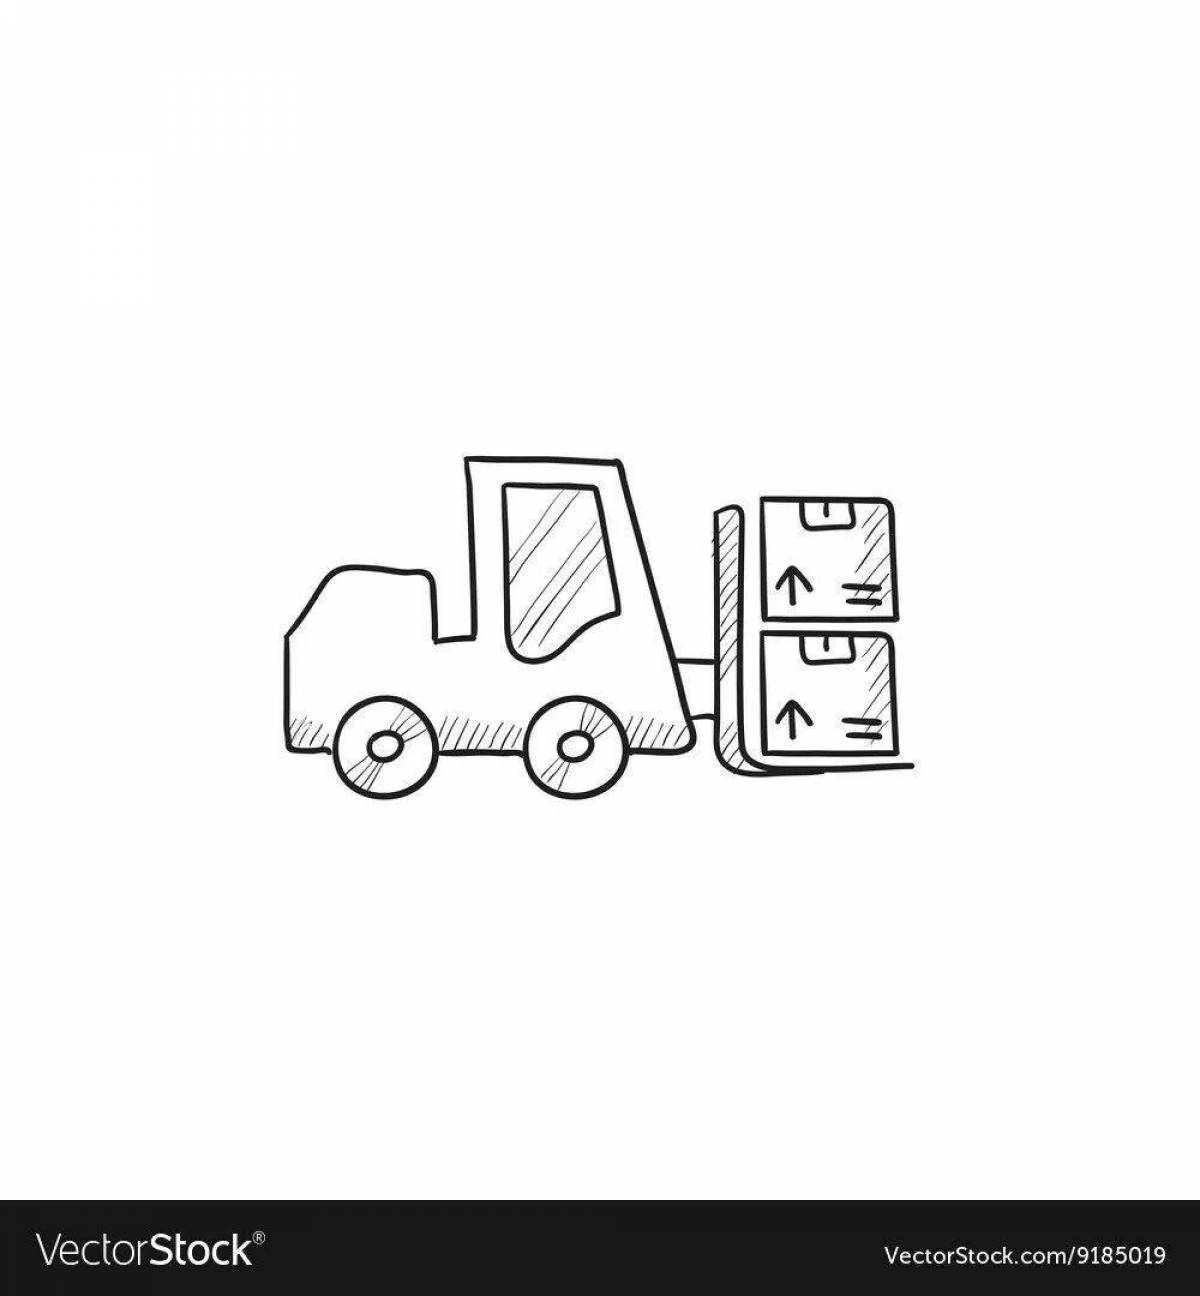 Cute forklift coloring page